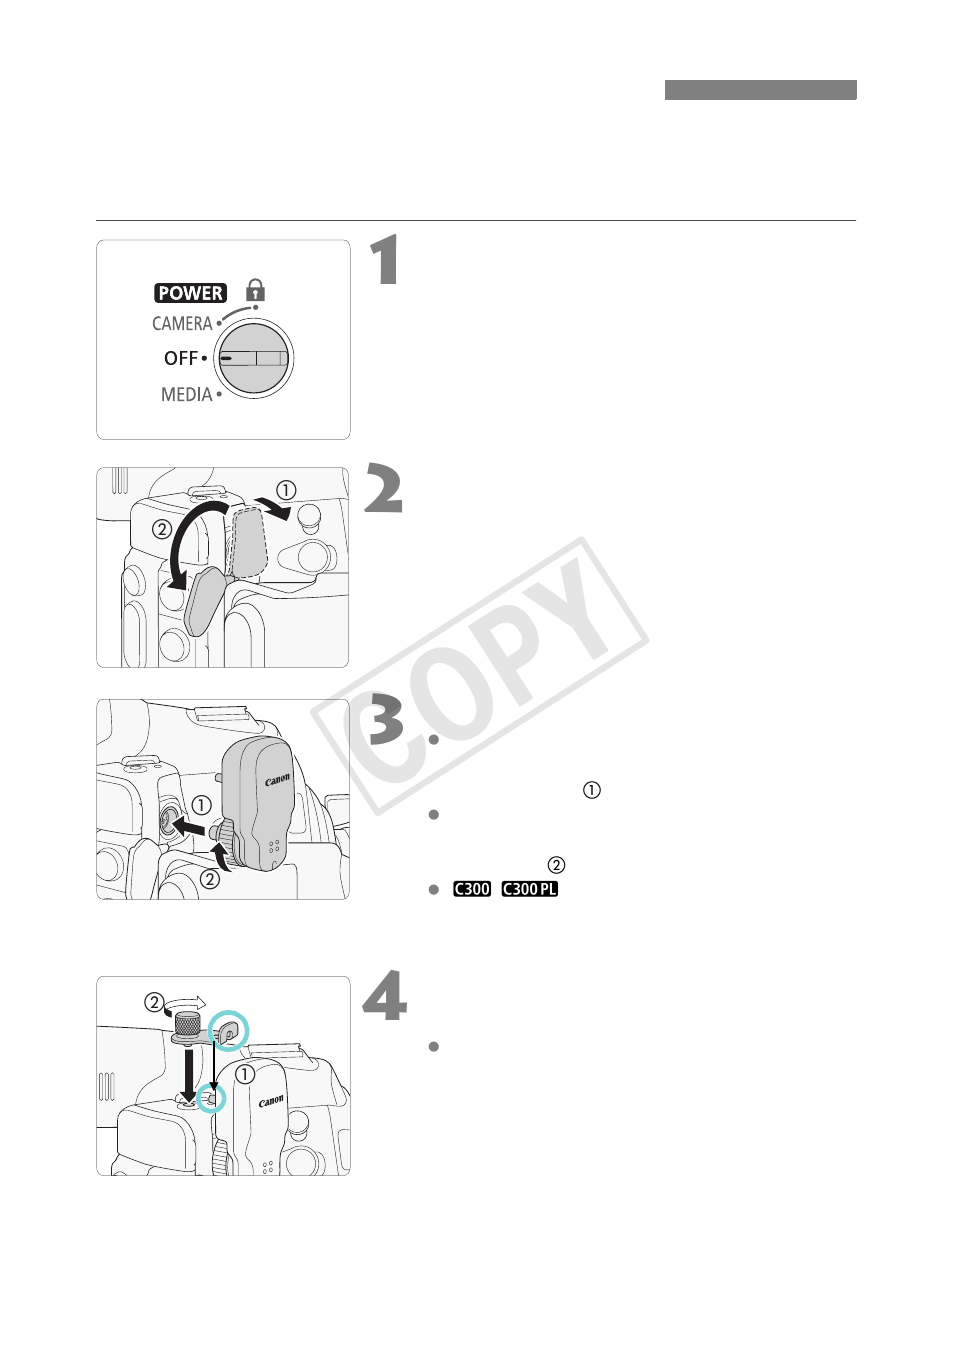 Attaching to a camcorder, Cop y | Canon EOS C300 User Manual | Page 4 / 44